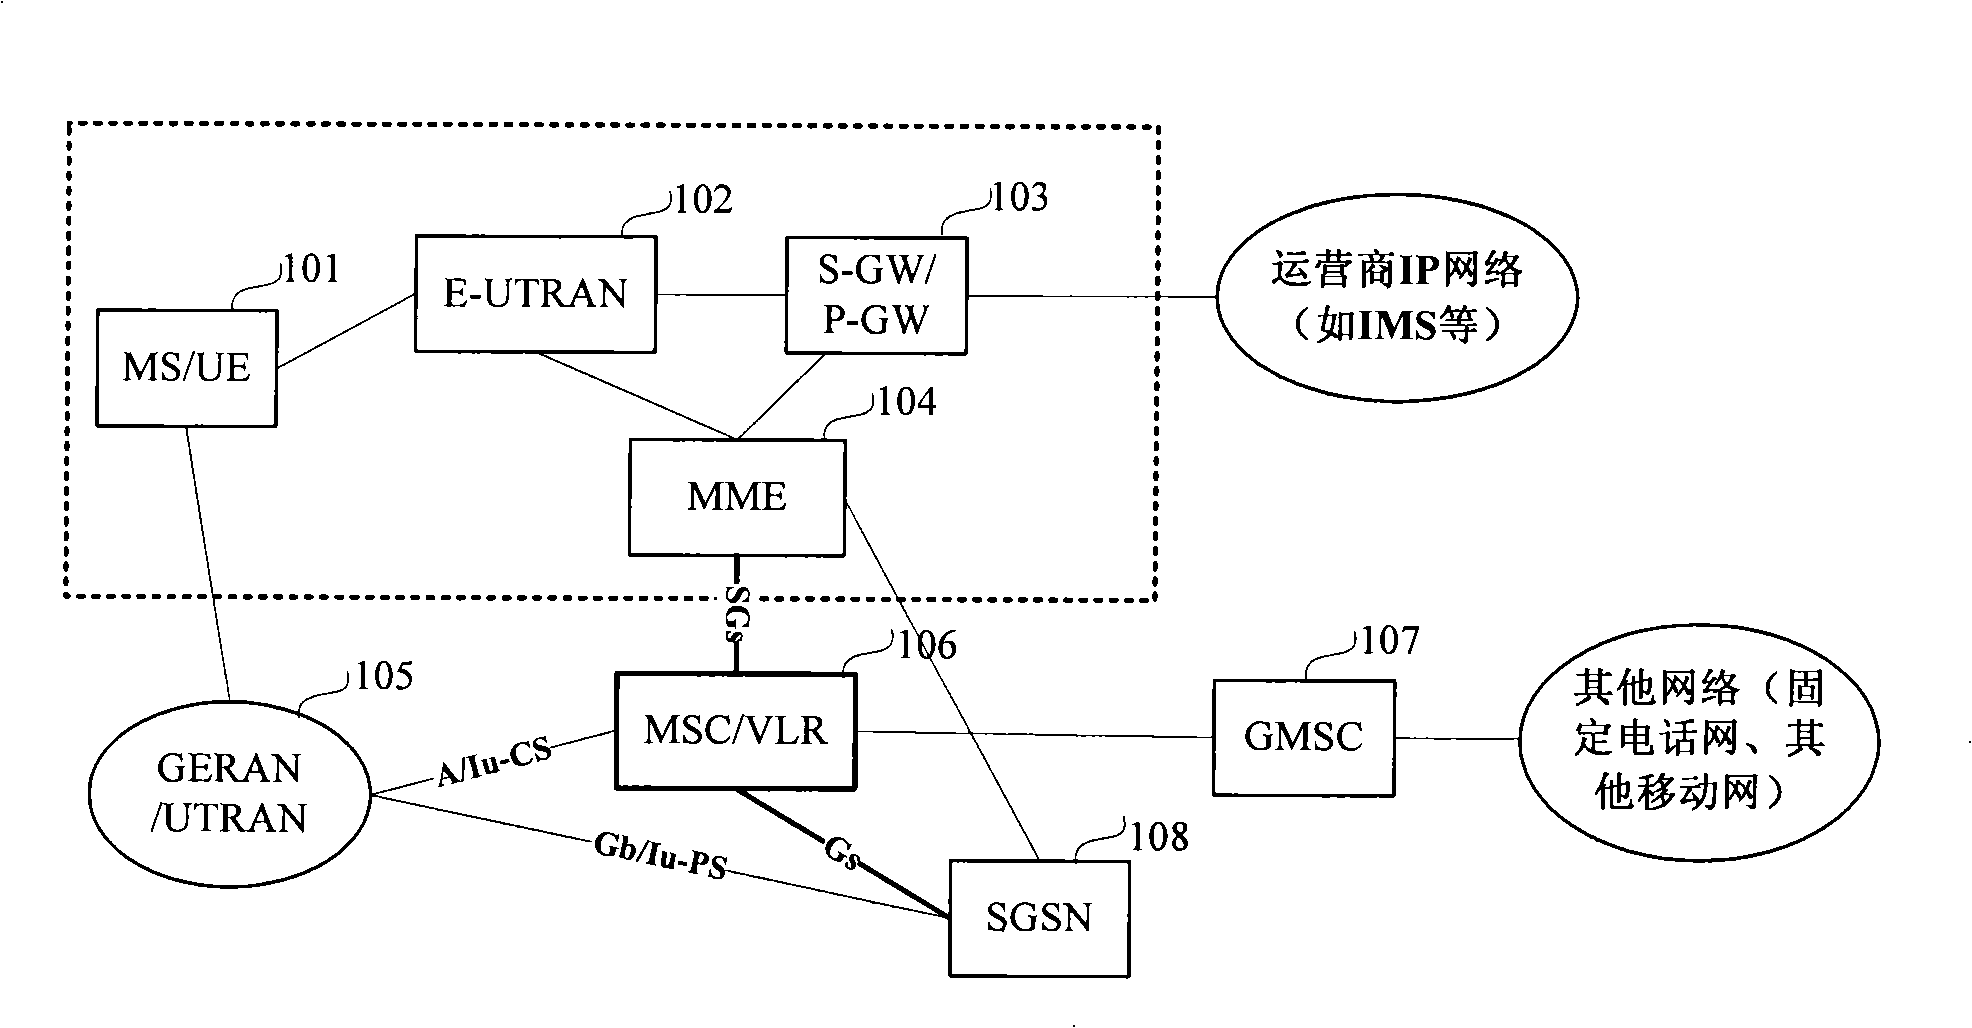 Circuit field service paging implementing method and apparatus